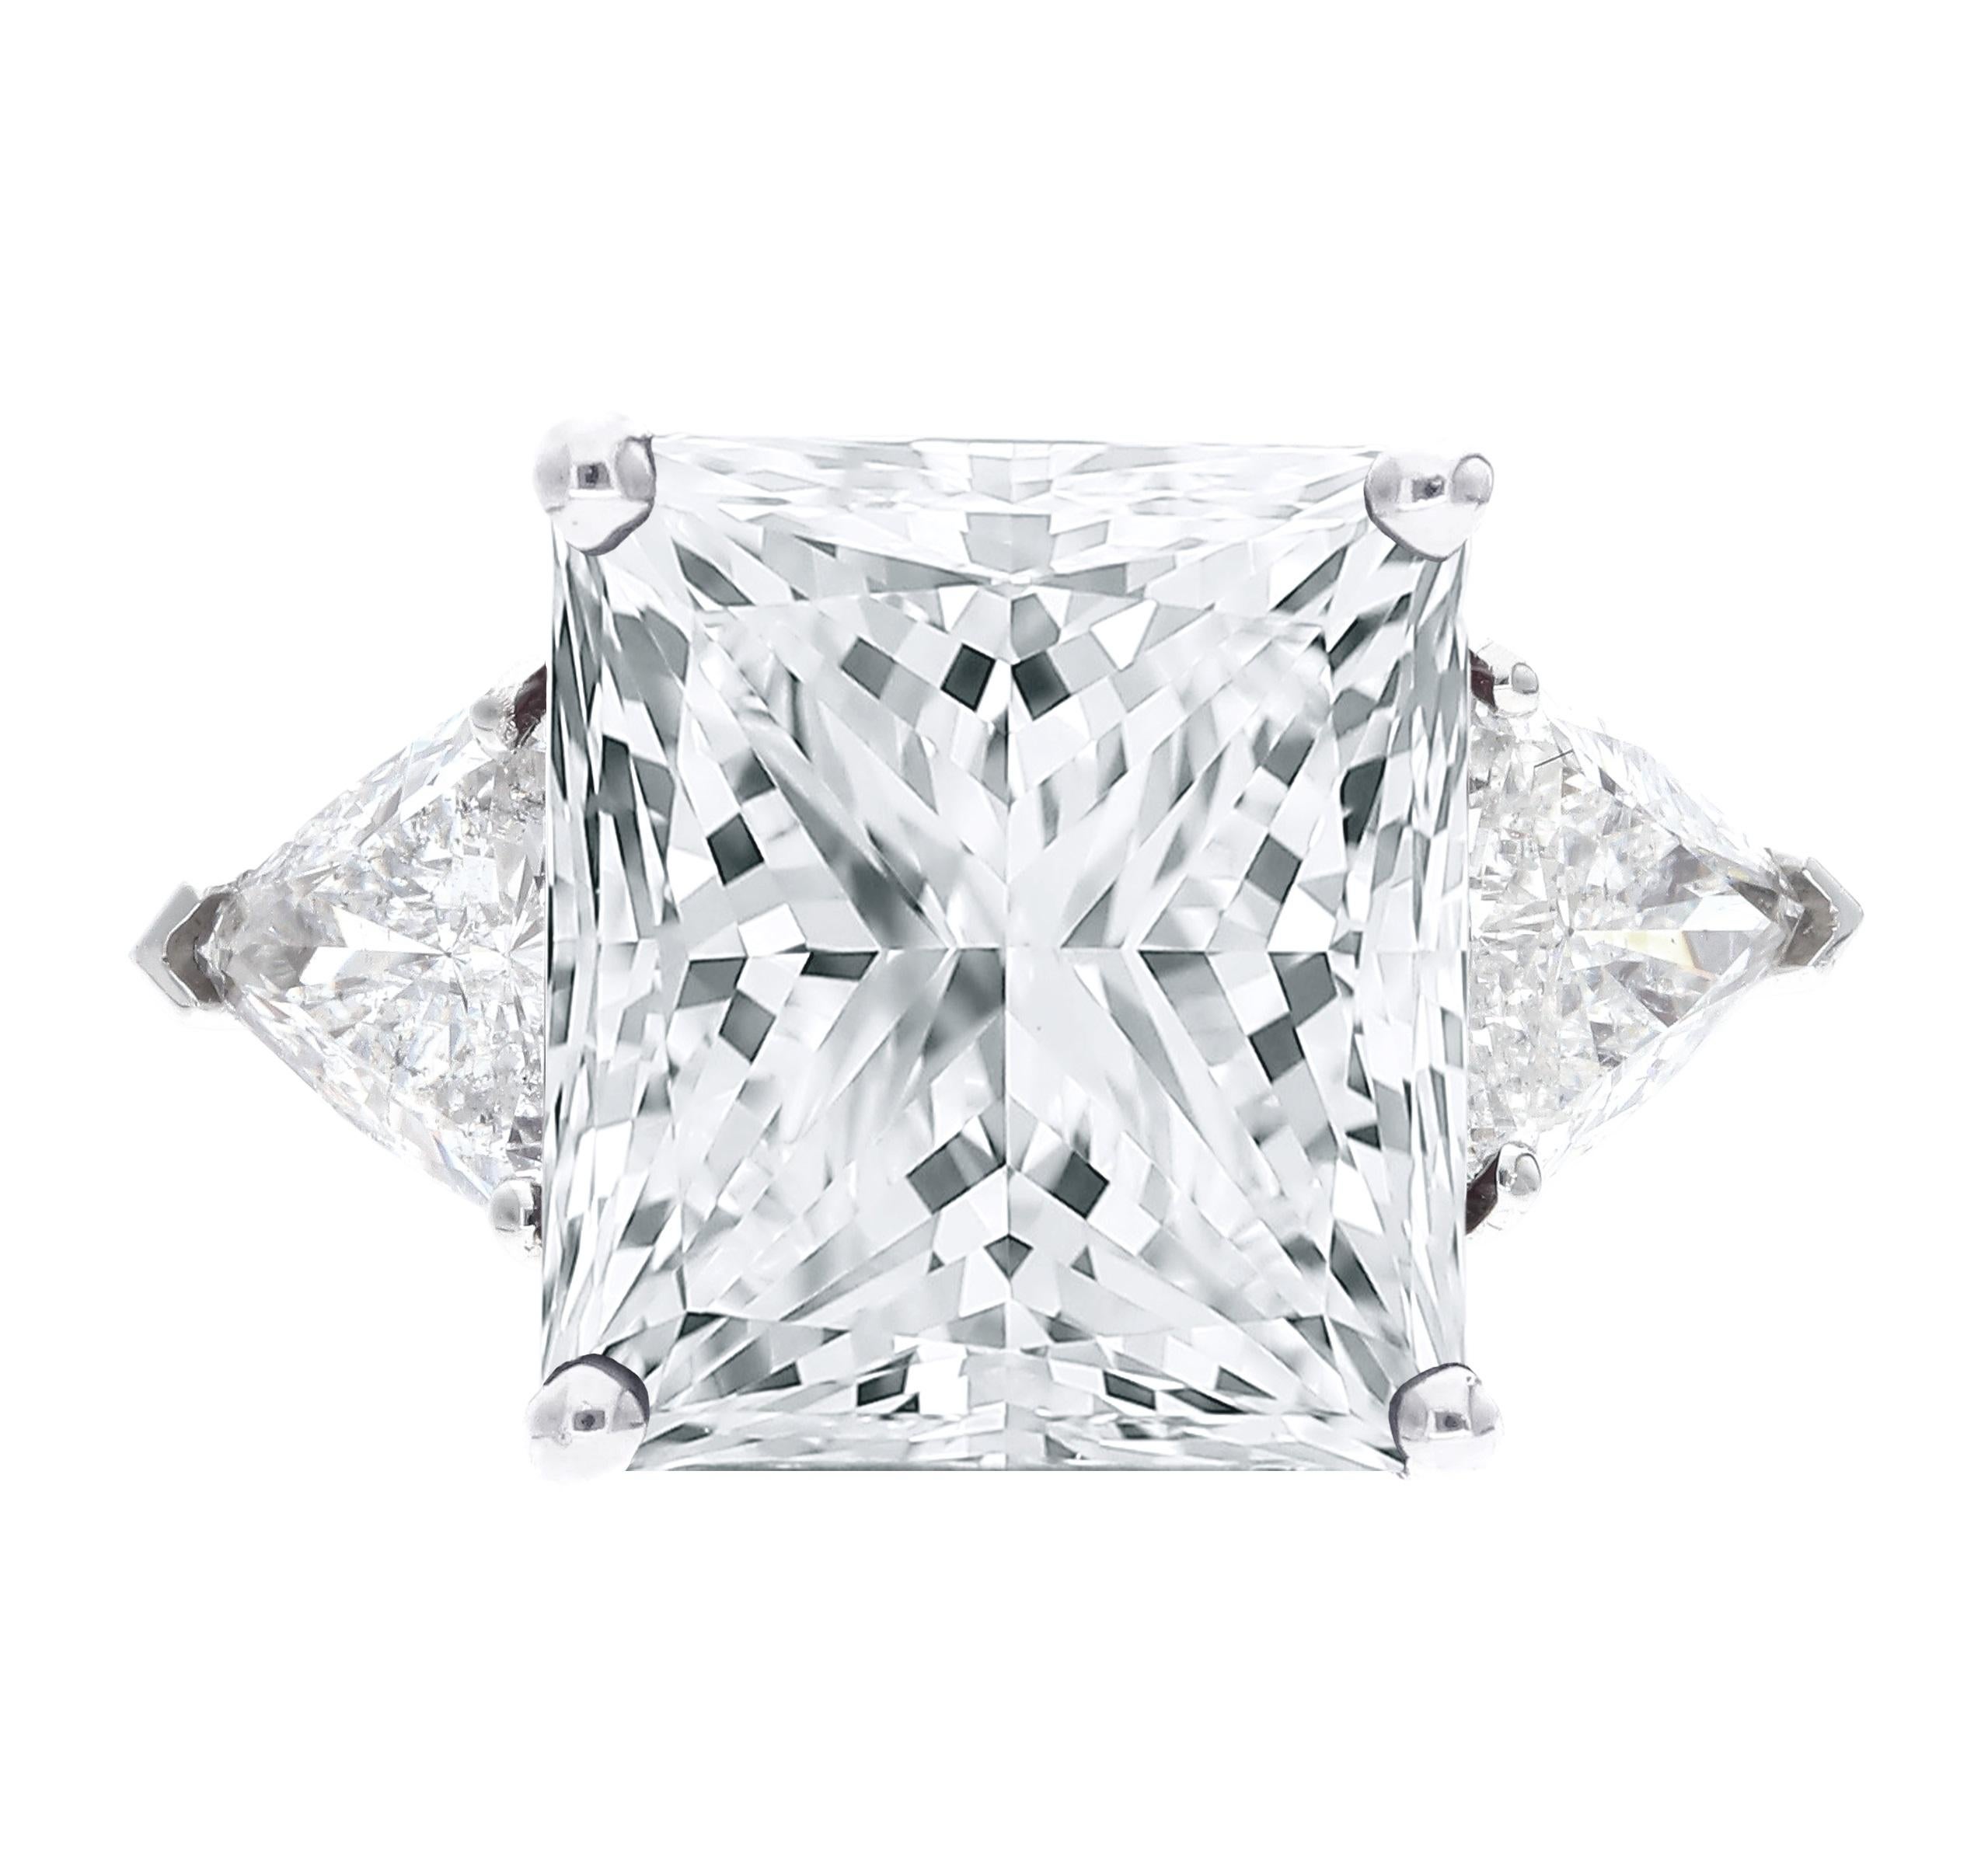 This stunning ring features a magnificent 4-carat princess-cut diamond at its center, exuding elegance and sophistication. Flanked on either side are two exquisite trillion-cut diamonds, adding a unique and captivating allure to the piece. Set in a